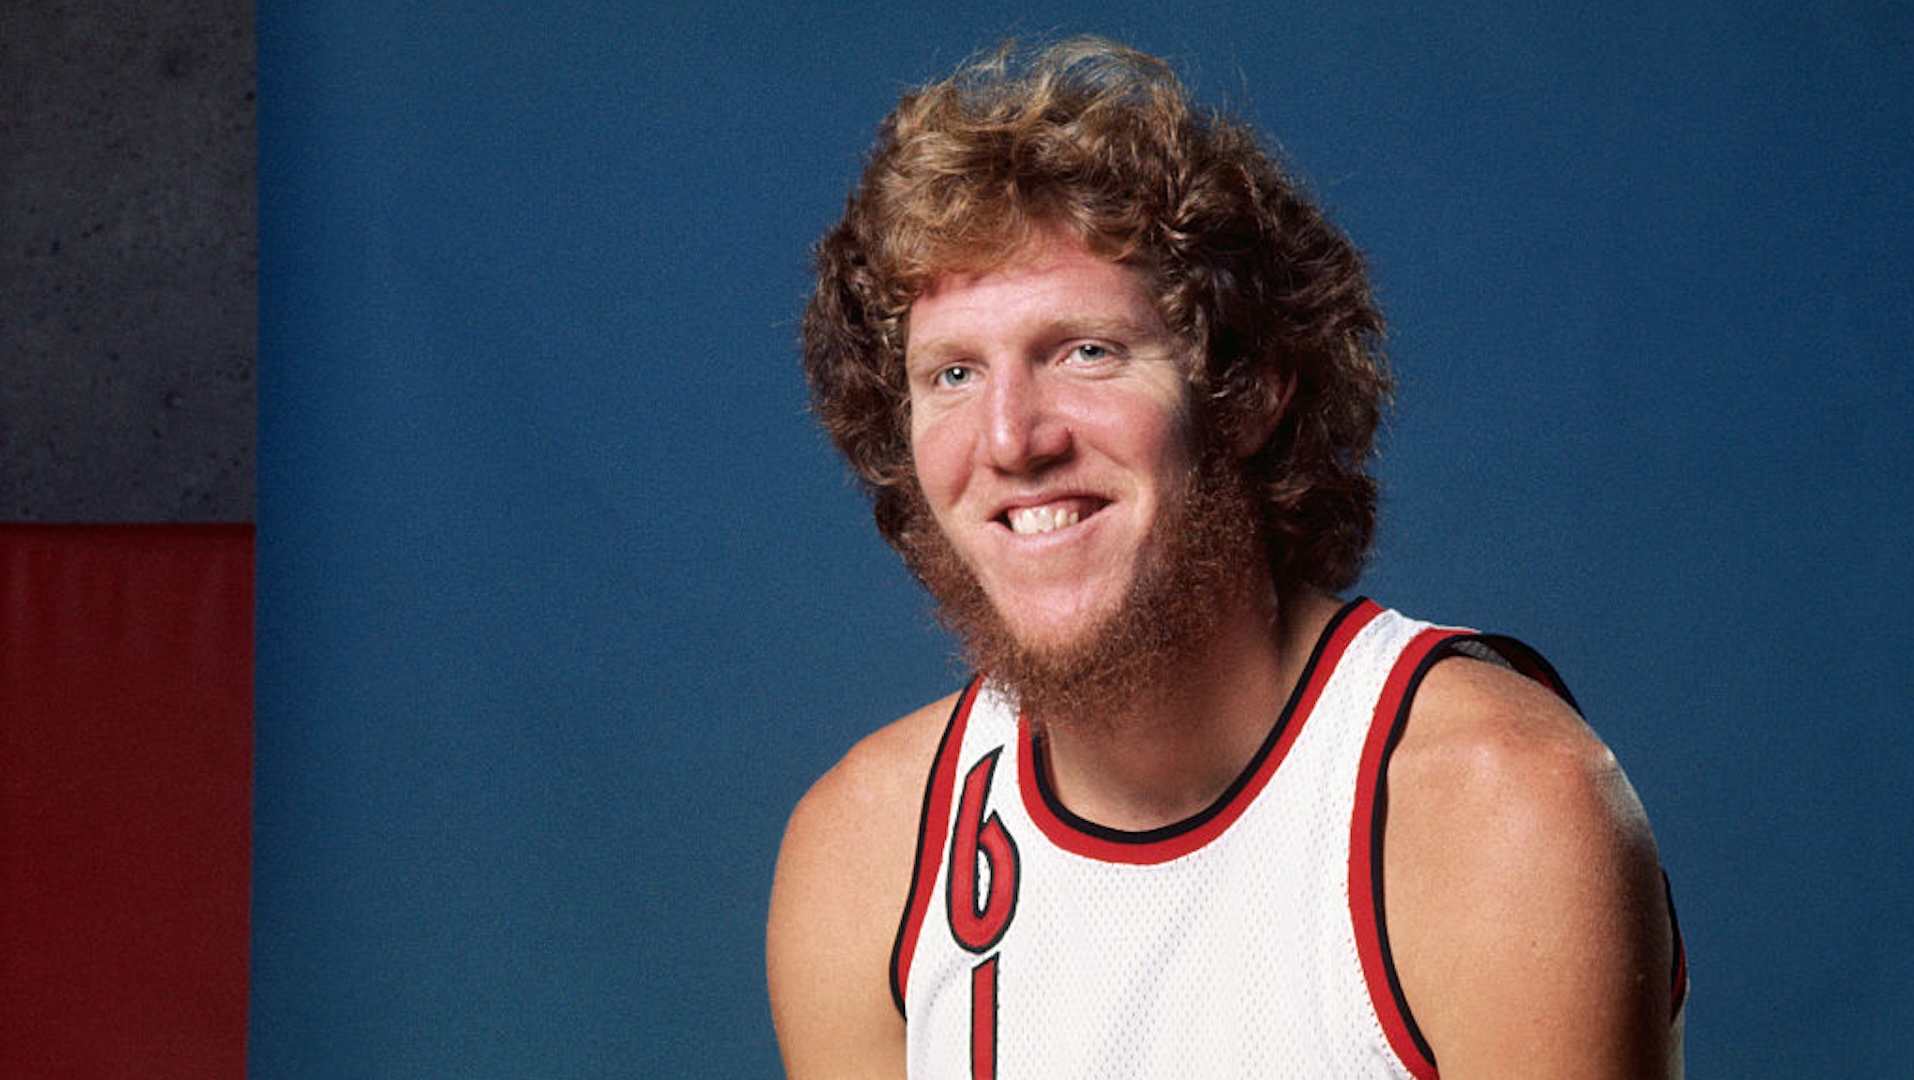 Portland Trail Blazers' Bill Walton, who received many accolades for his performance on the court, is depicted here. Walton would later go on to pursue a career off the court as a sports broadcaster and an actor in feature films.